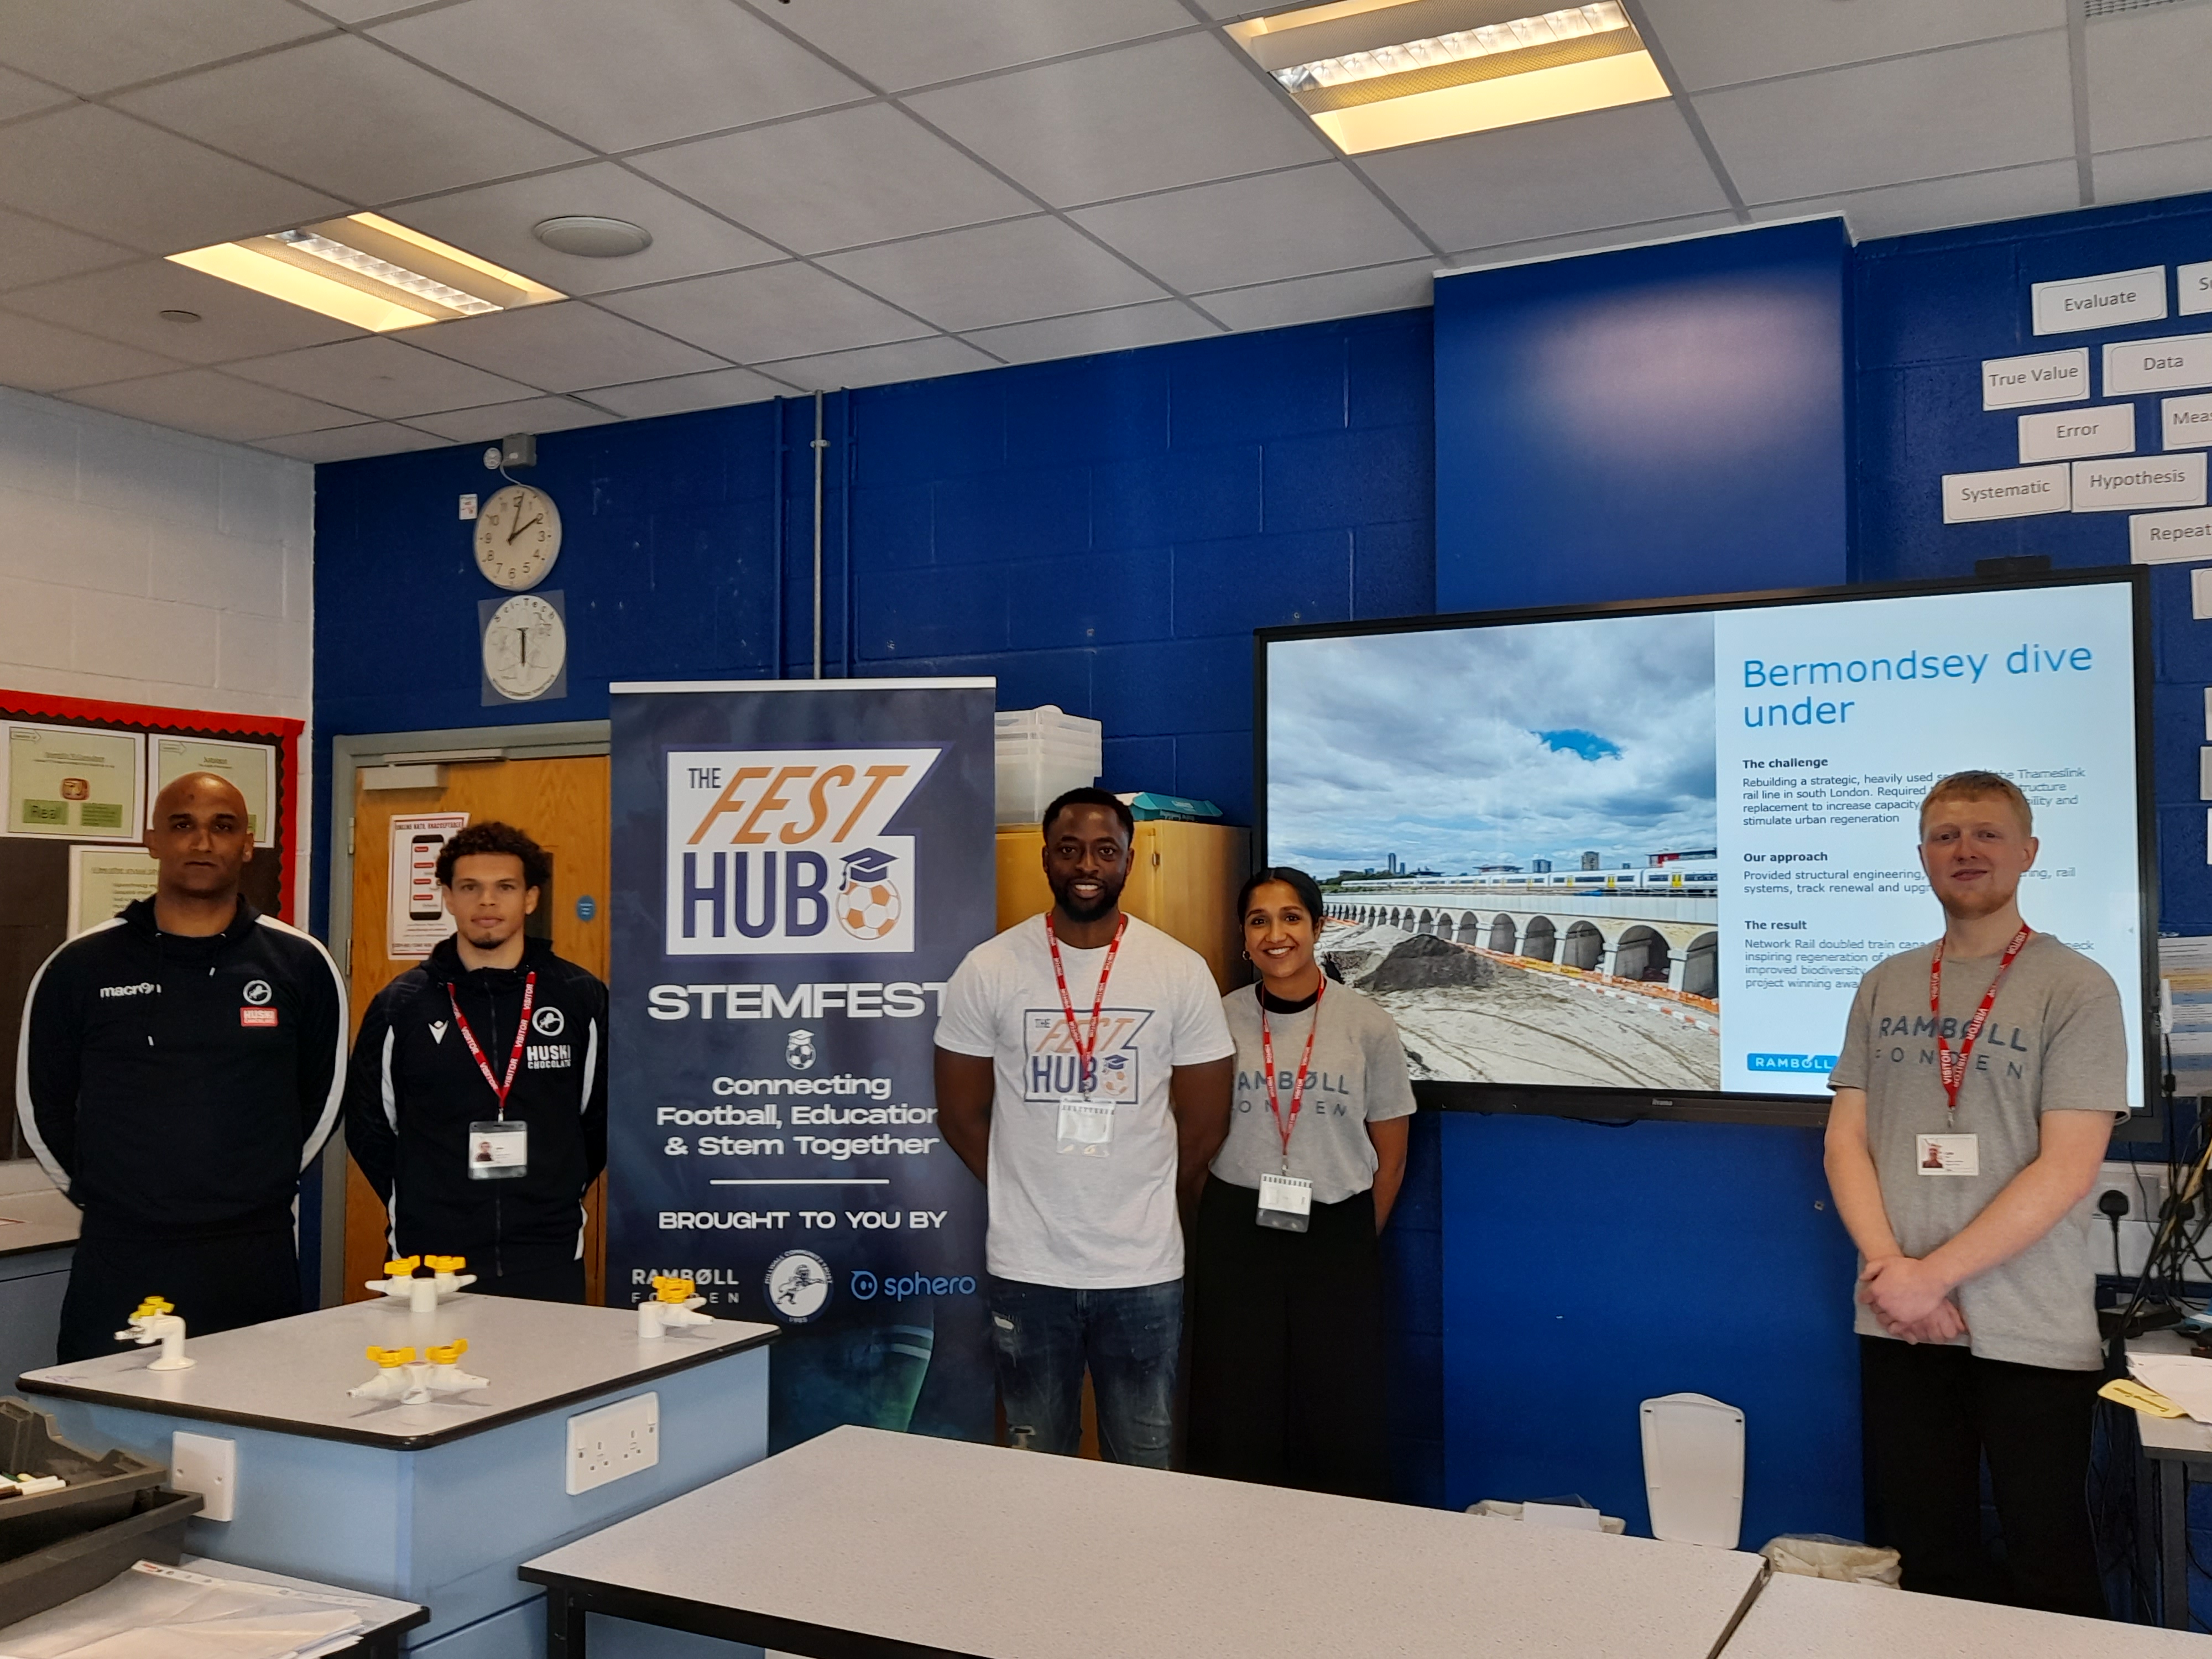 Millwall Supports Students in STEM with The FEST Hub